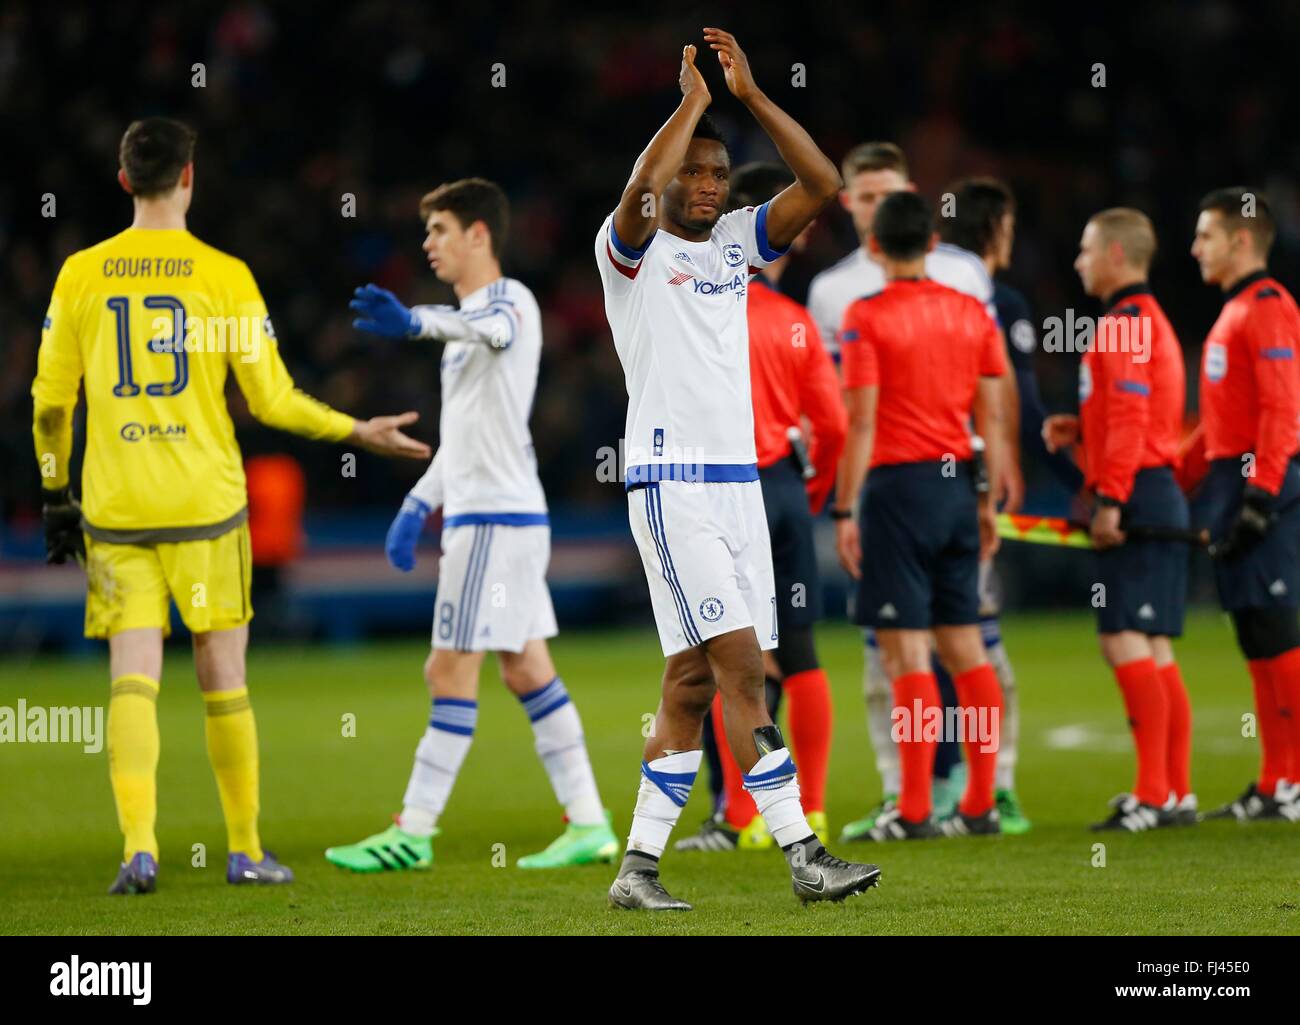 Chelsea’s Mikel John Obi applauds the Chelsea fans after the UEFA Champions League round of 16 match between Paris Saint-Germain and Chelsea at the Parc des Princes Stadium in Paris. February 16, 2016. James Boardman / Telephoto Images +44 7967 642437 Stock Photo